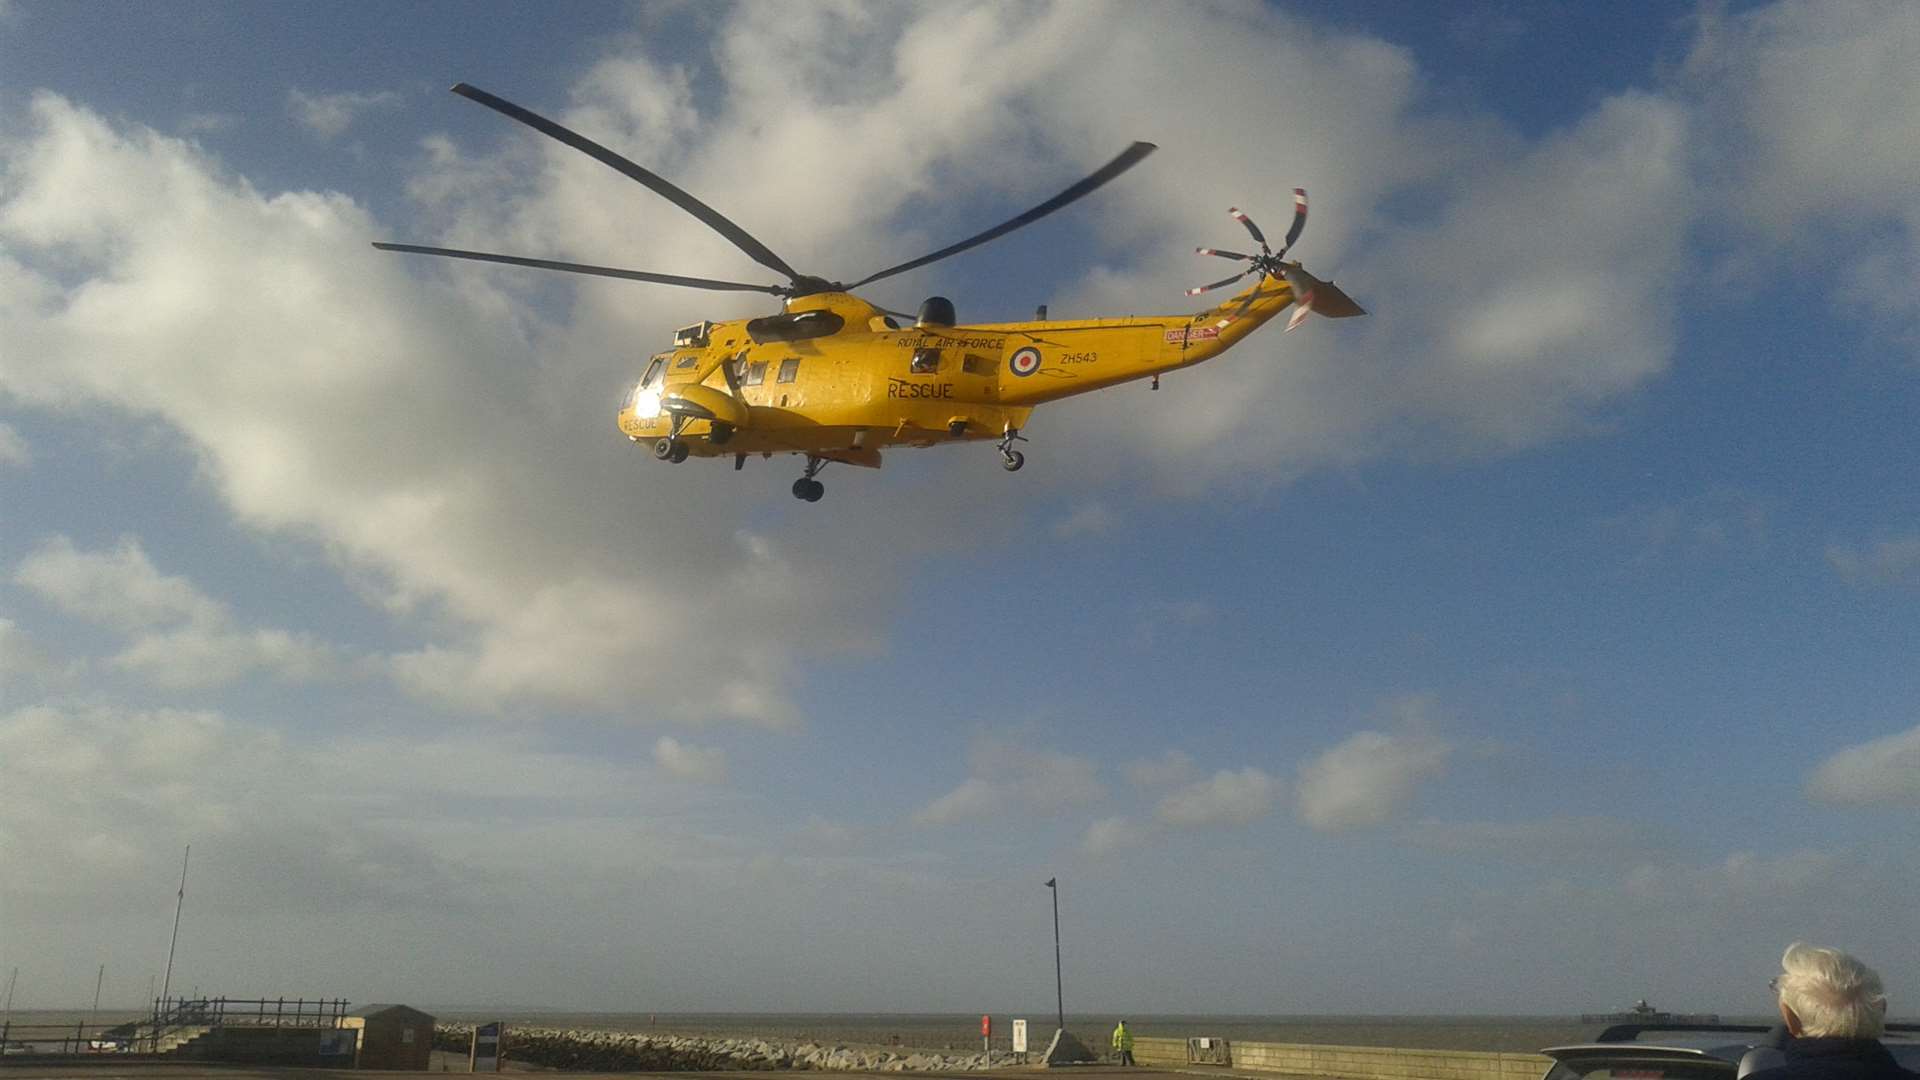 A rescue helicopter landing at Herne Bay Pier